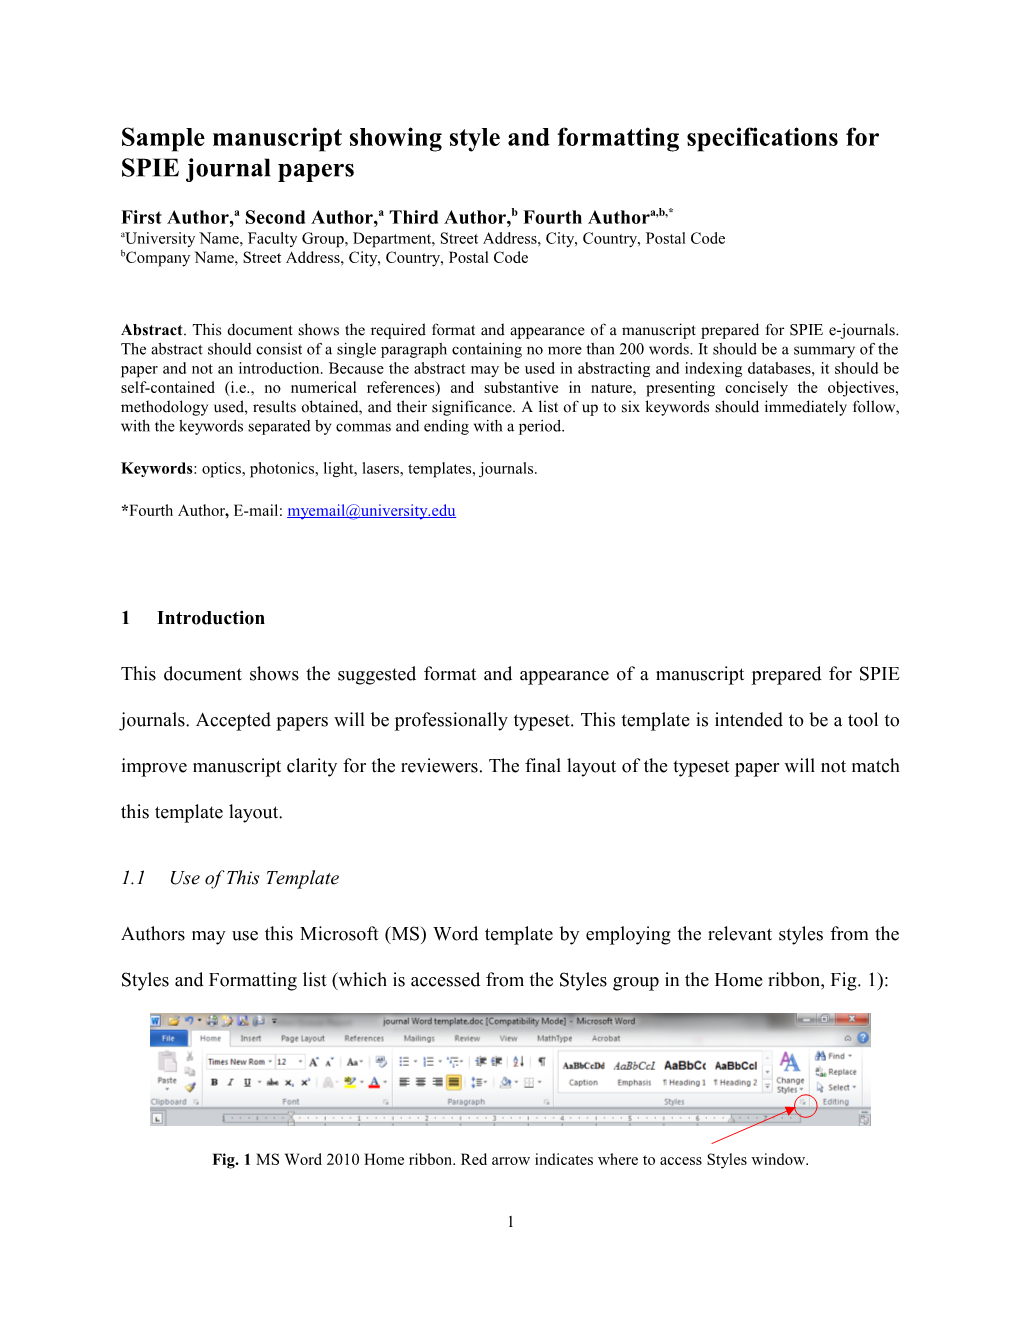 Sample Manuscript Showing Style And Formatting Specifications For SPIE E-Journal Papers